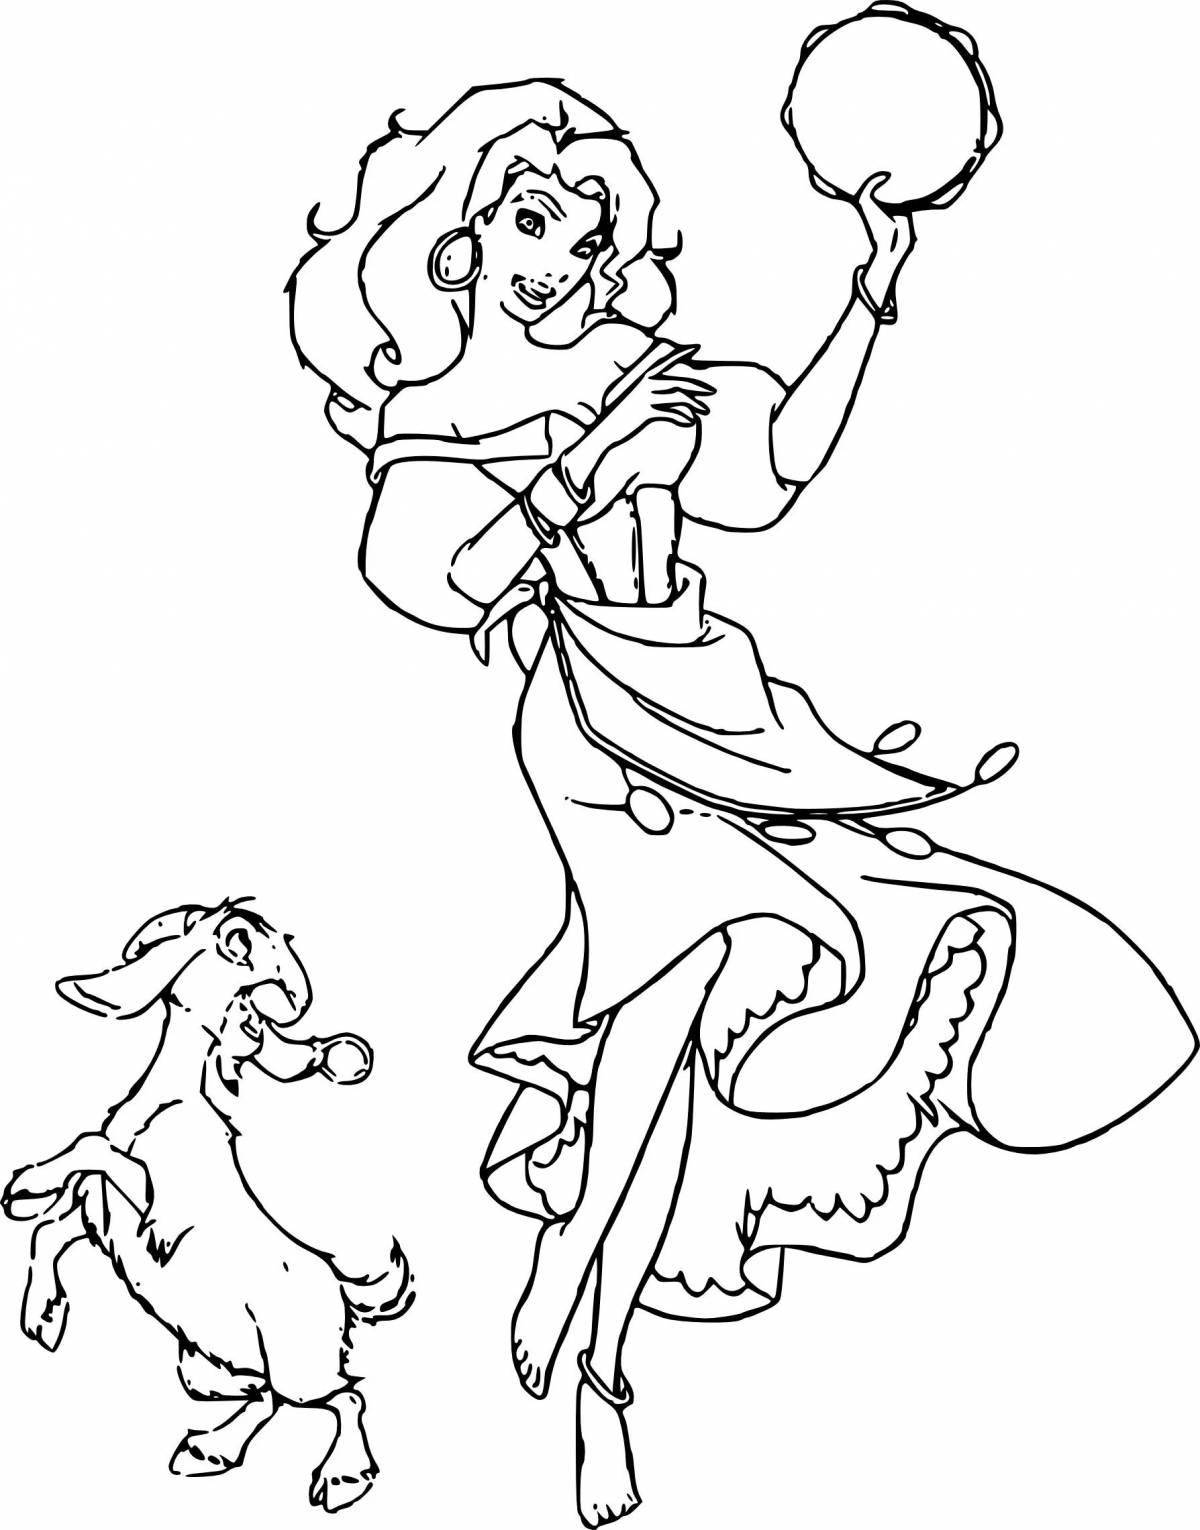 Coloring page funny gypsy